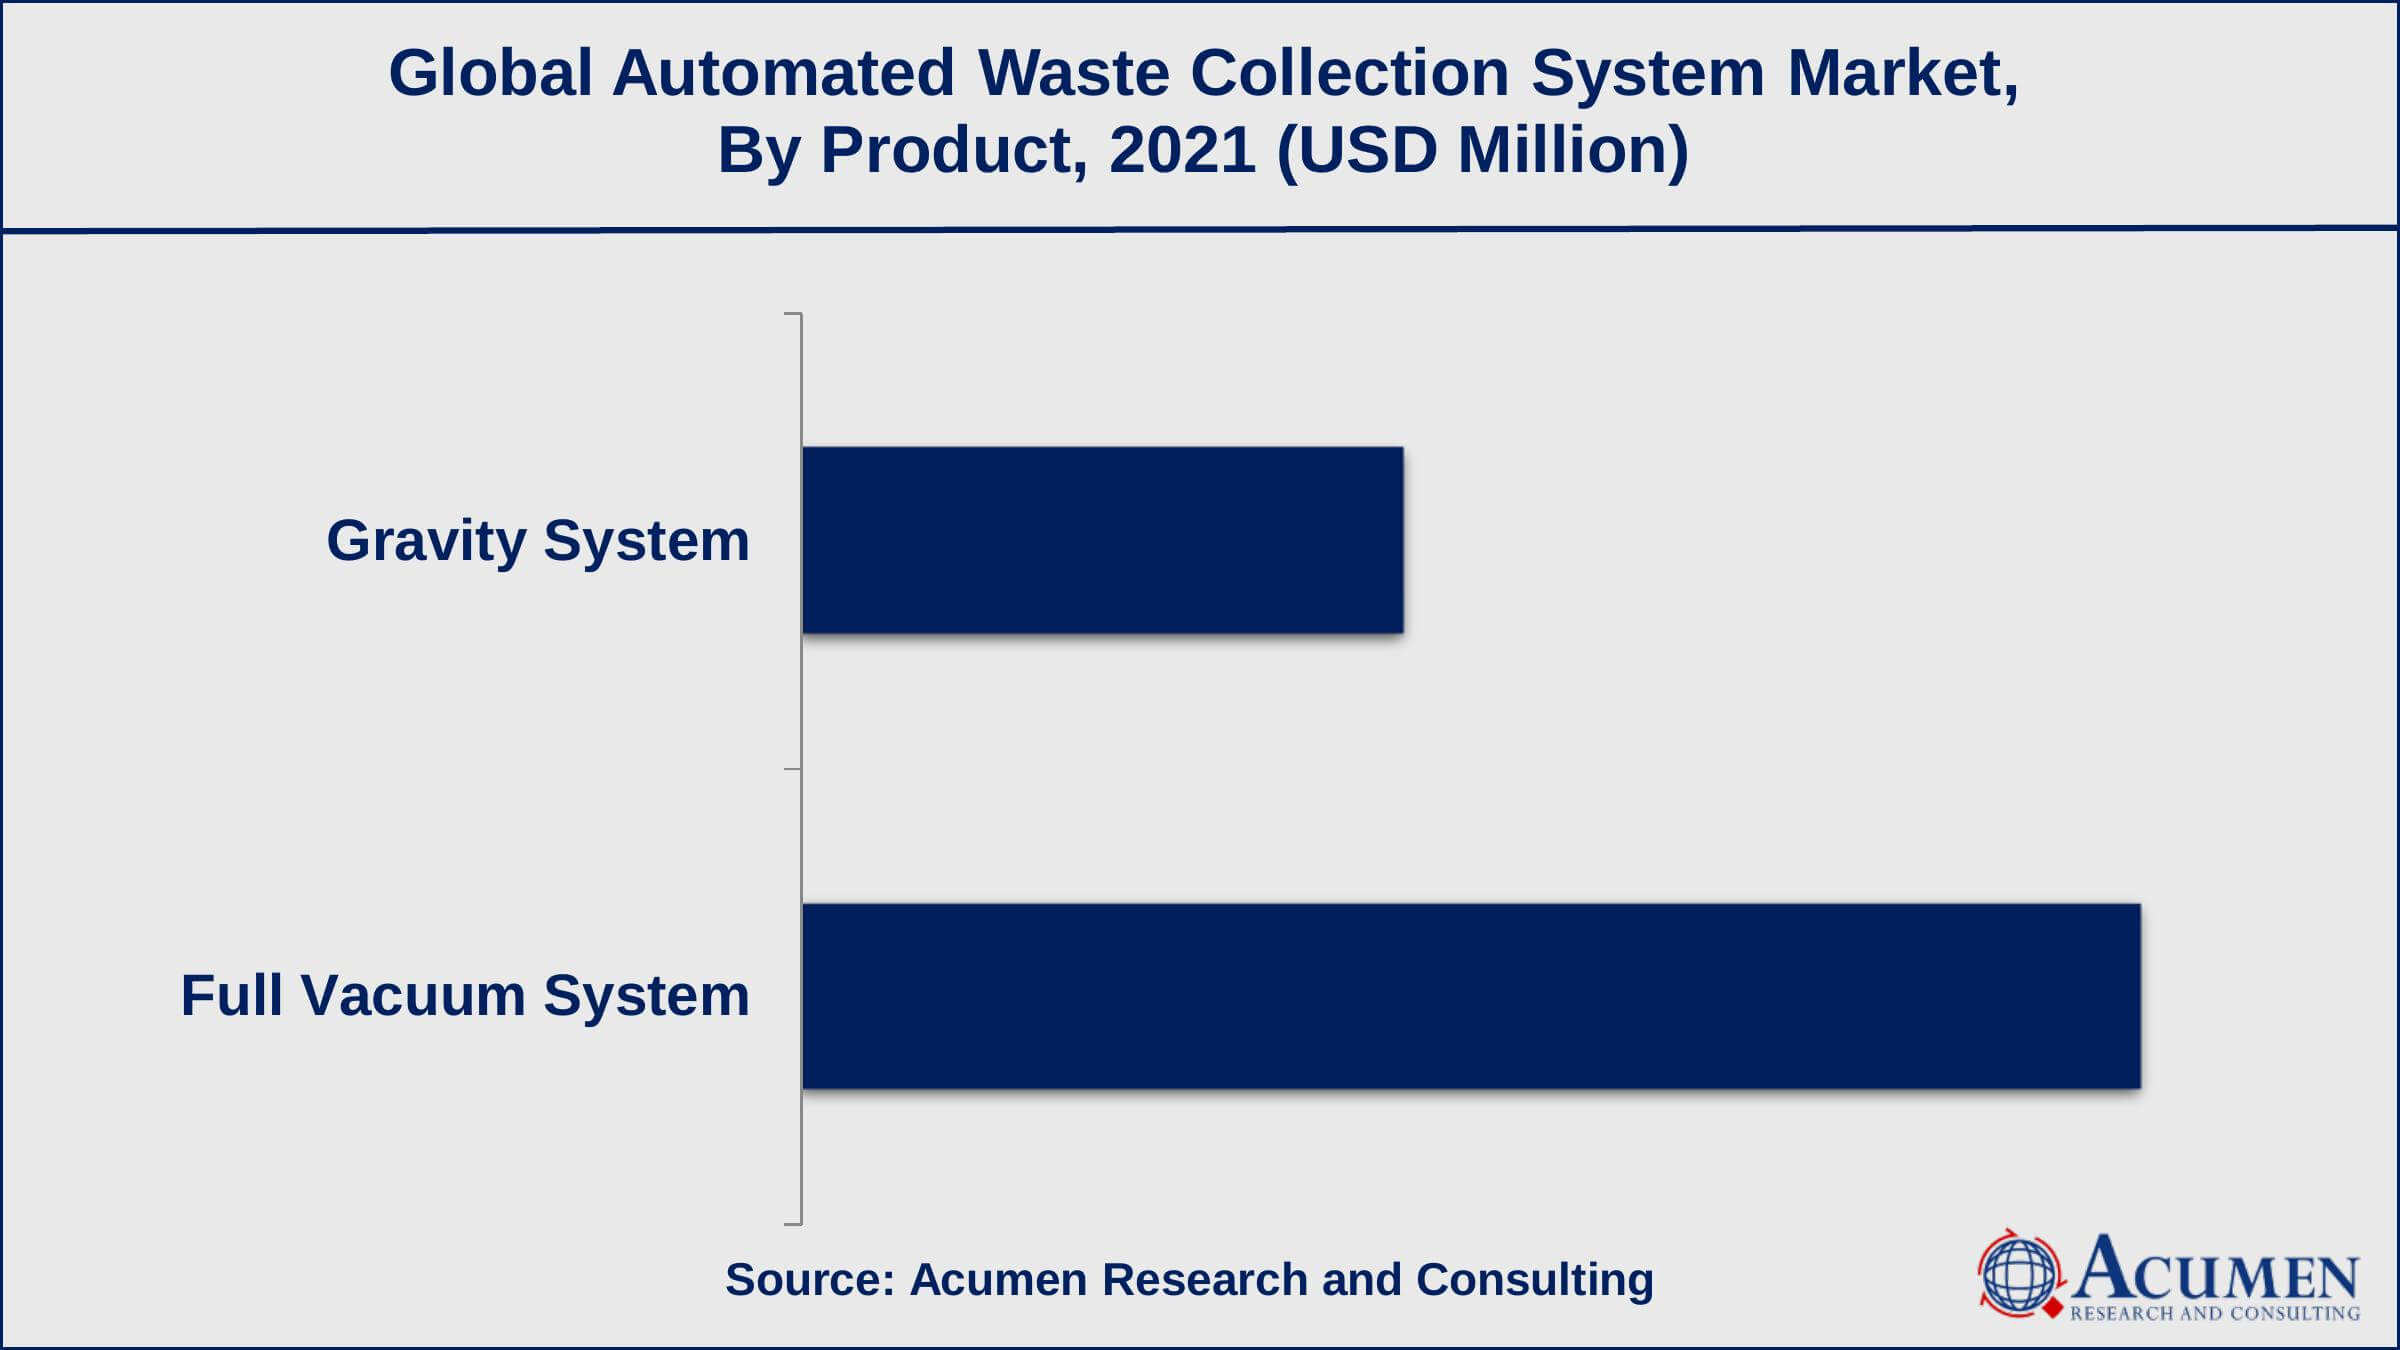 Among product, the full vacuum systems sub-segment collected revenue of US$ 192.2 million in 2021